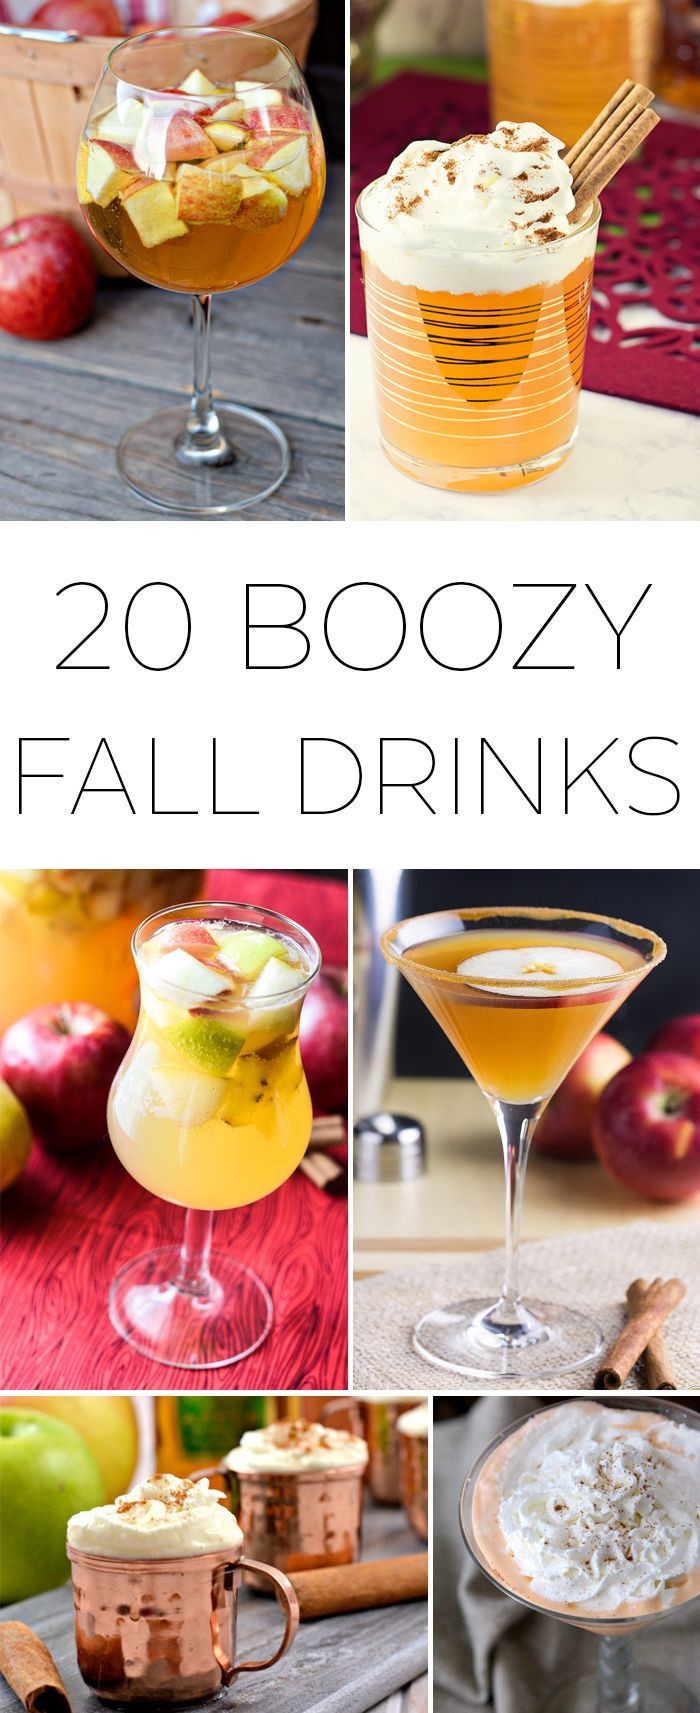 Alcoholic Thanksgiving Drinks
 104 best Holidays Thanksgiving and Fall images on